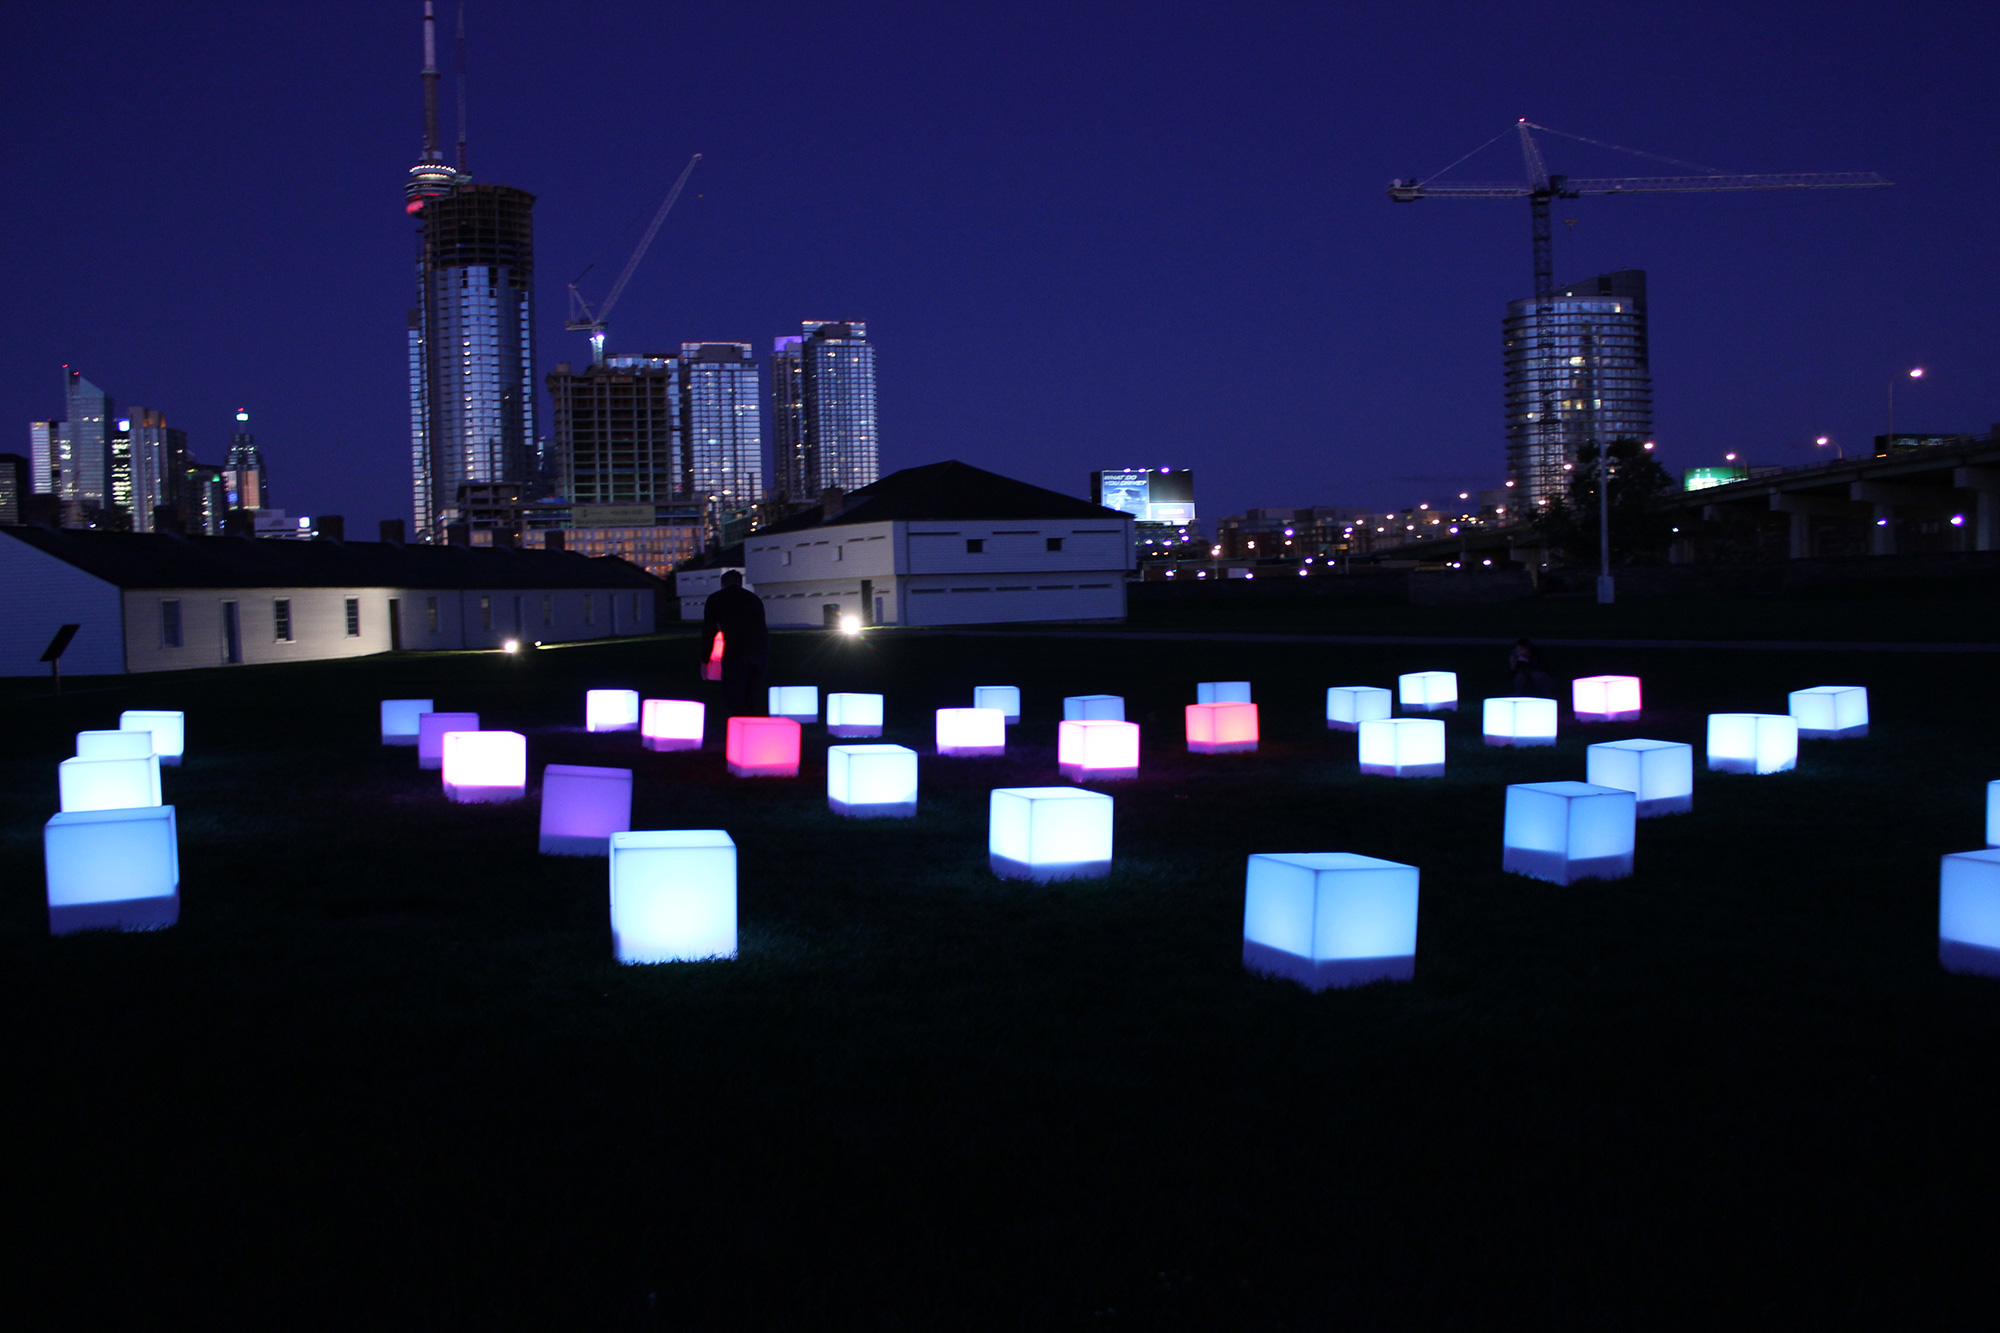 SMILE at Fort York for Nuit Blanche